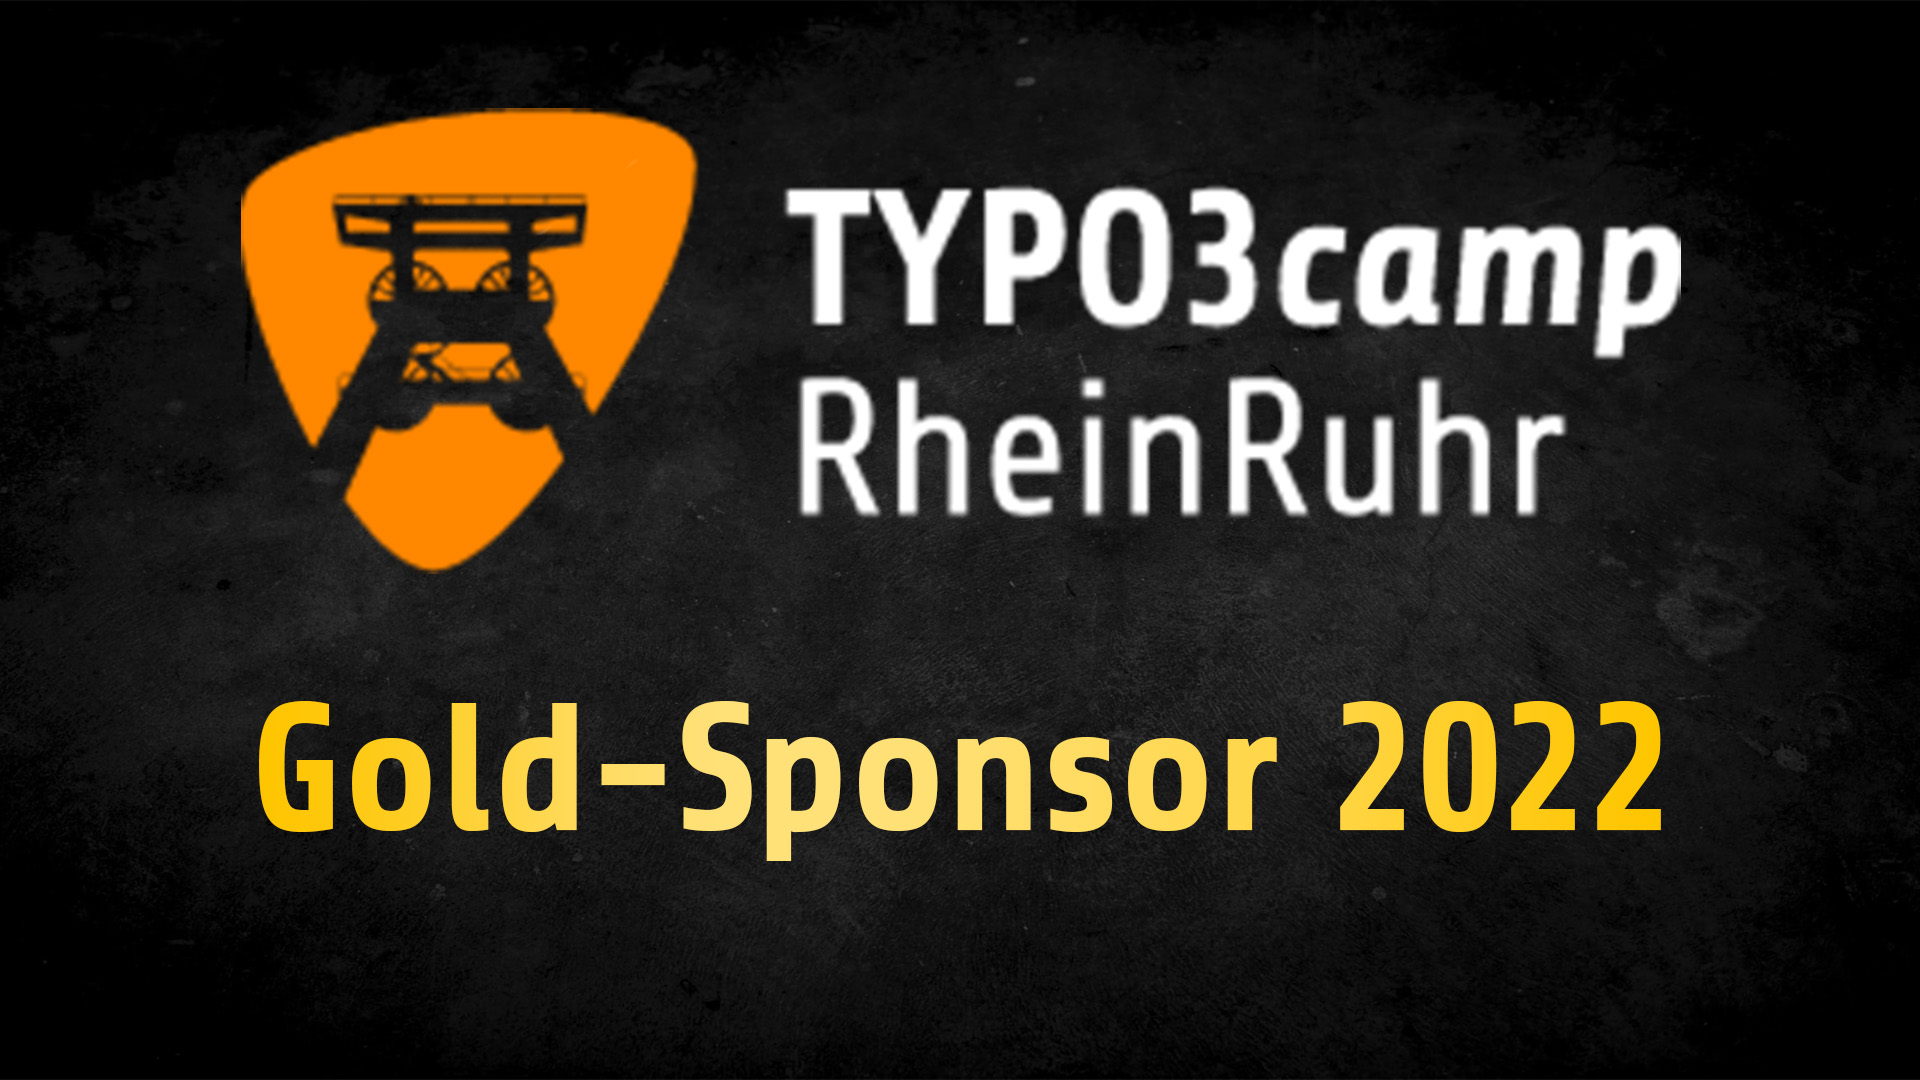 You are currently viewing Als Gold-Sponsor beim TYPO3camp RheinRuhr 2022